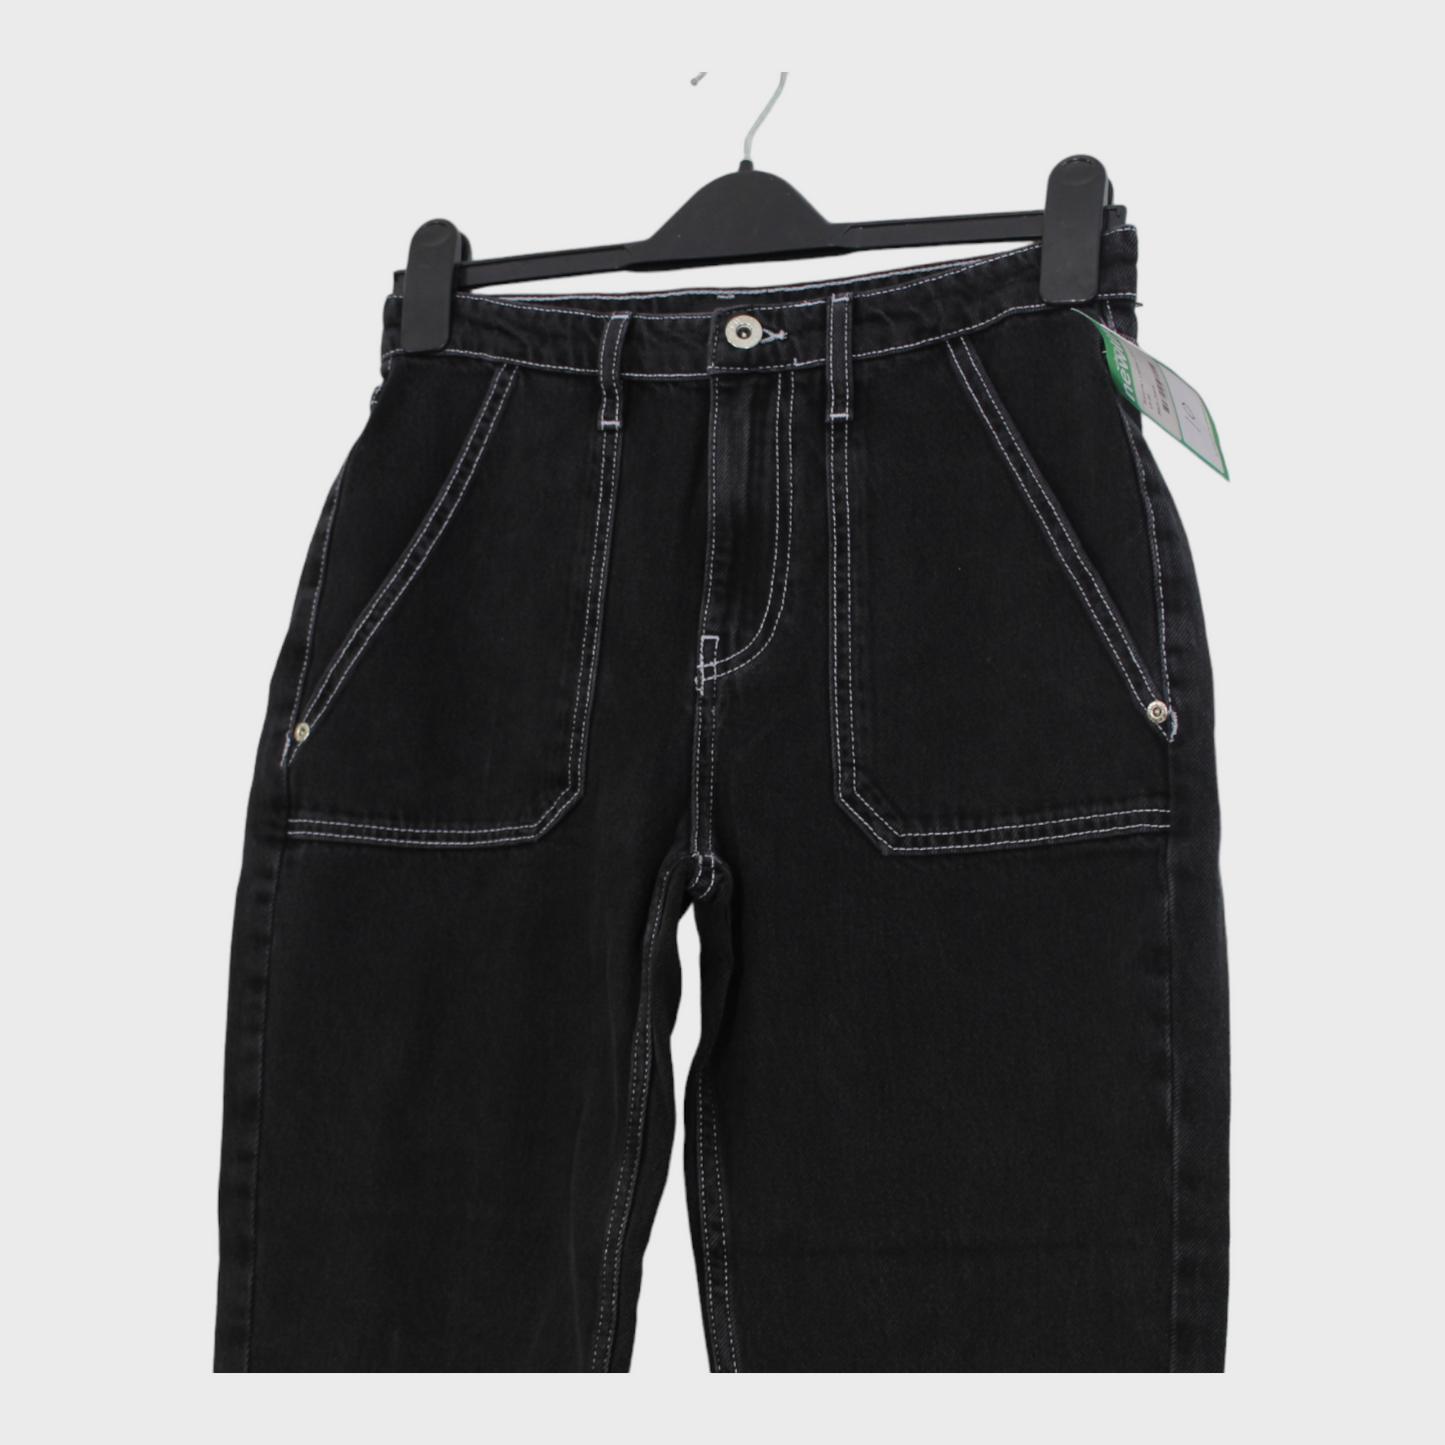 Womens Black Jeans With Contrast Stitching